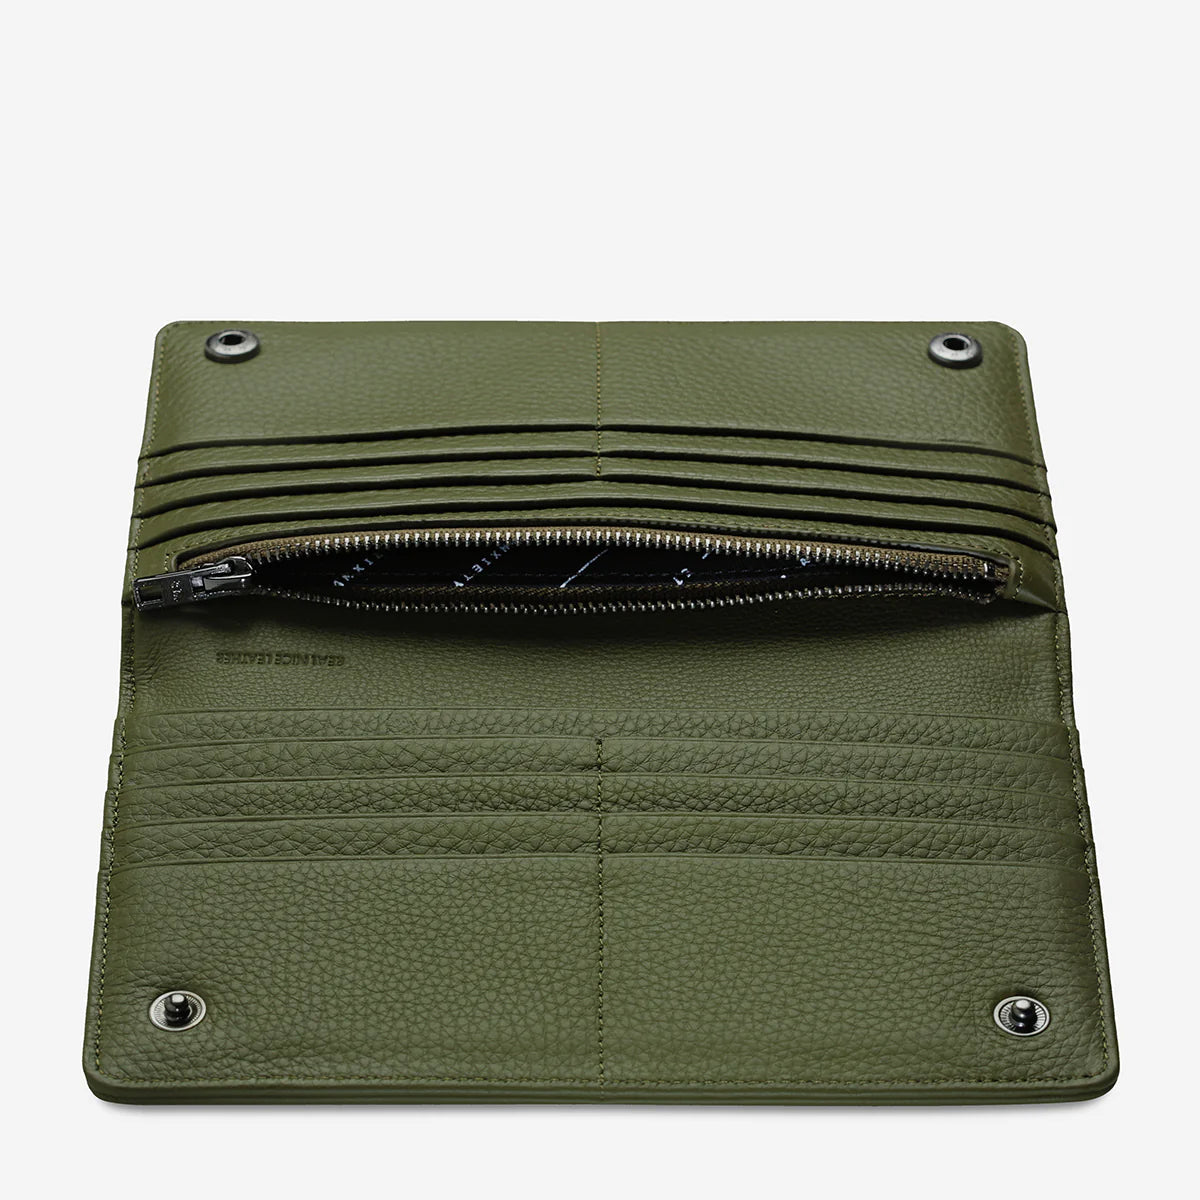 Status Anxiety Living Proof Leather Wallet - Khaki 